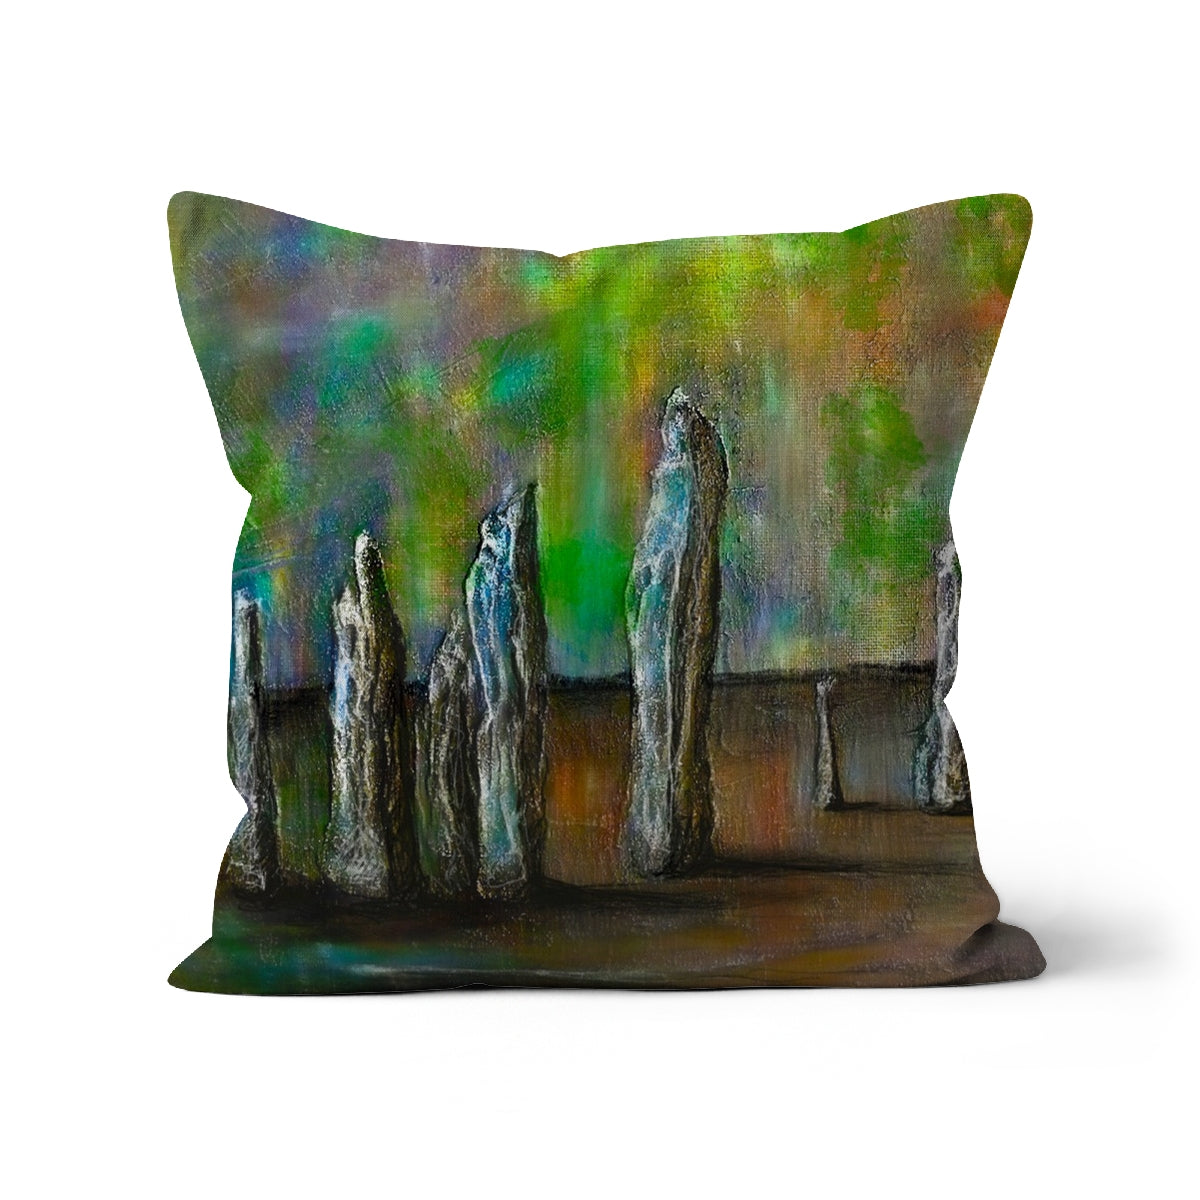 Callanish Northern Lights Art Gifts Cushion-Cushions-Hebridean Islands Art Gallery-Faux Suede-24"x24"-Paintings, Prints, Homeware, Art Gifts From Scotland By Scottish Artist Kevin Hunter